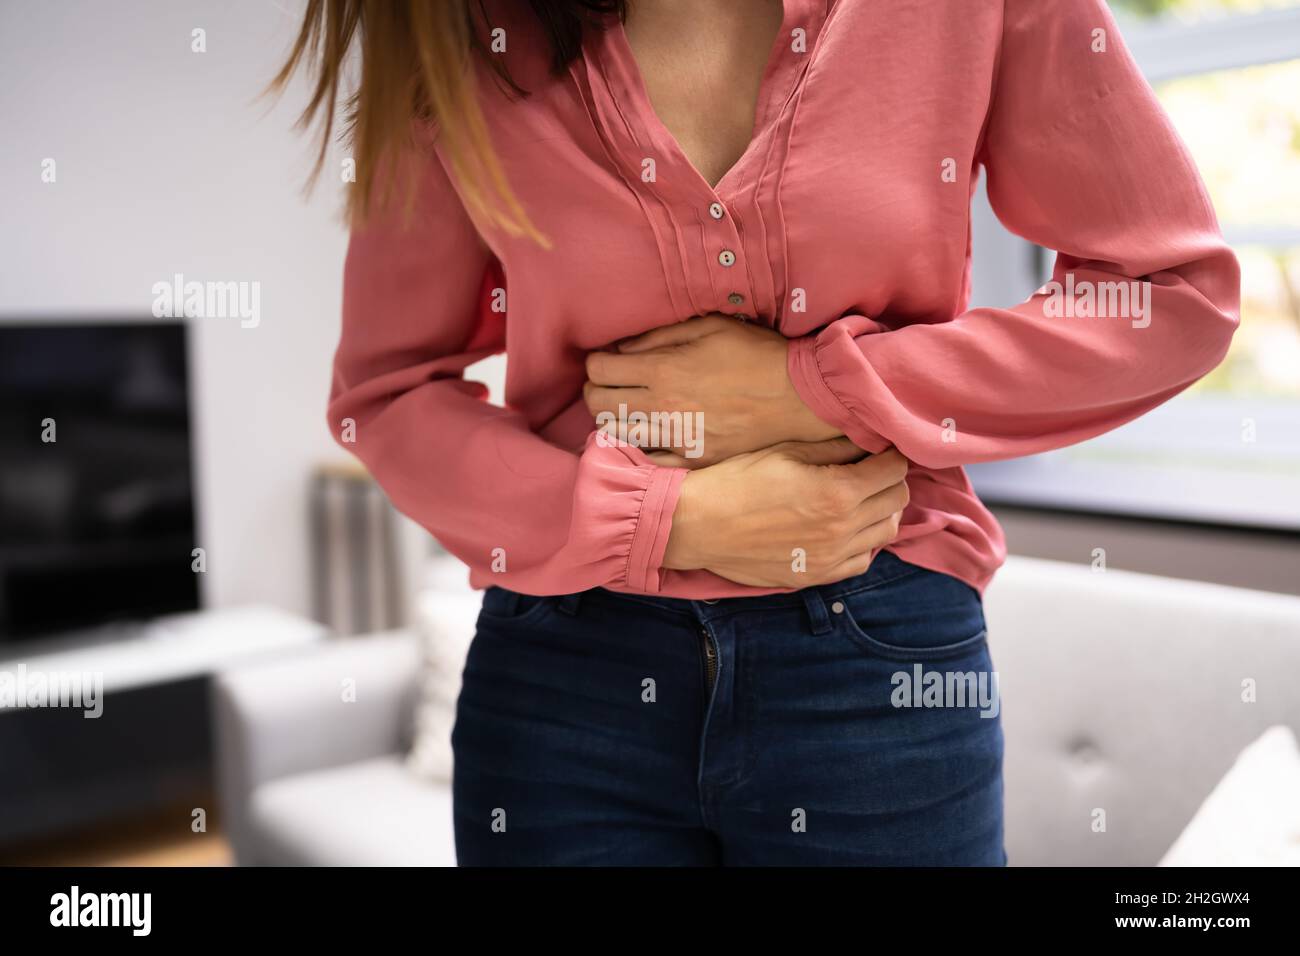 Sick Woman With Abdominal Pain And PMS Period Stock Photo